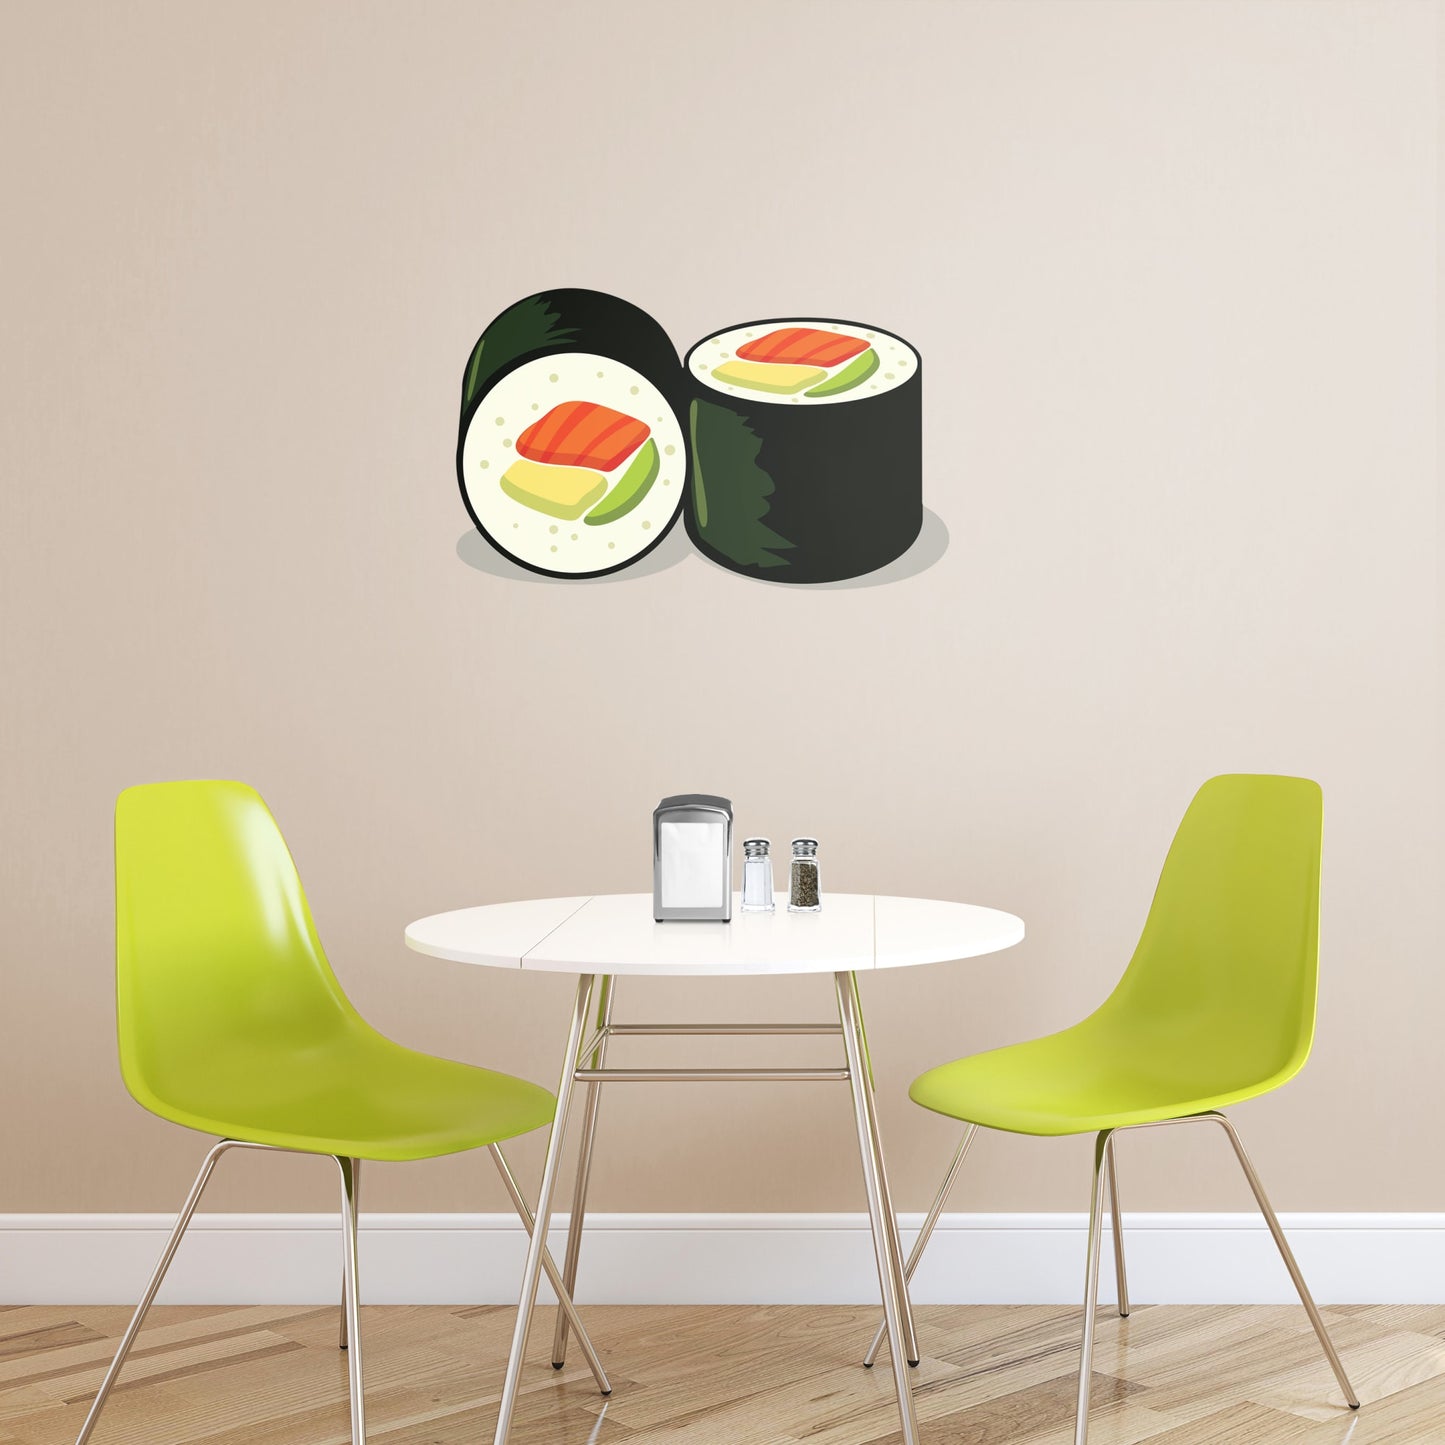 Large Sushi Roll + 2 Decals (15"W x 9"H)